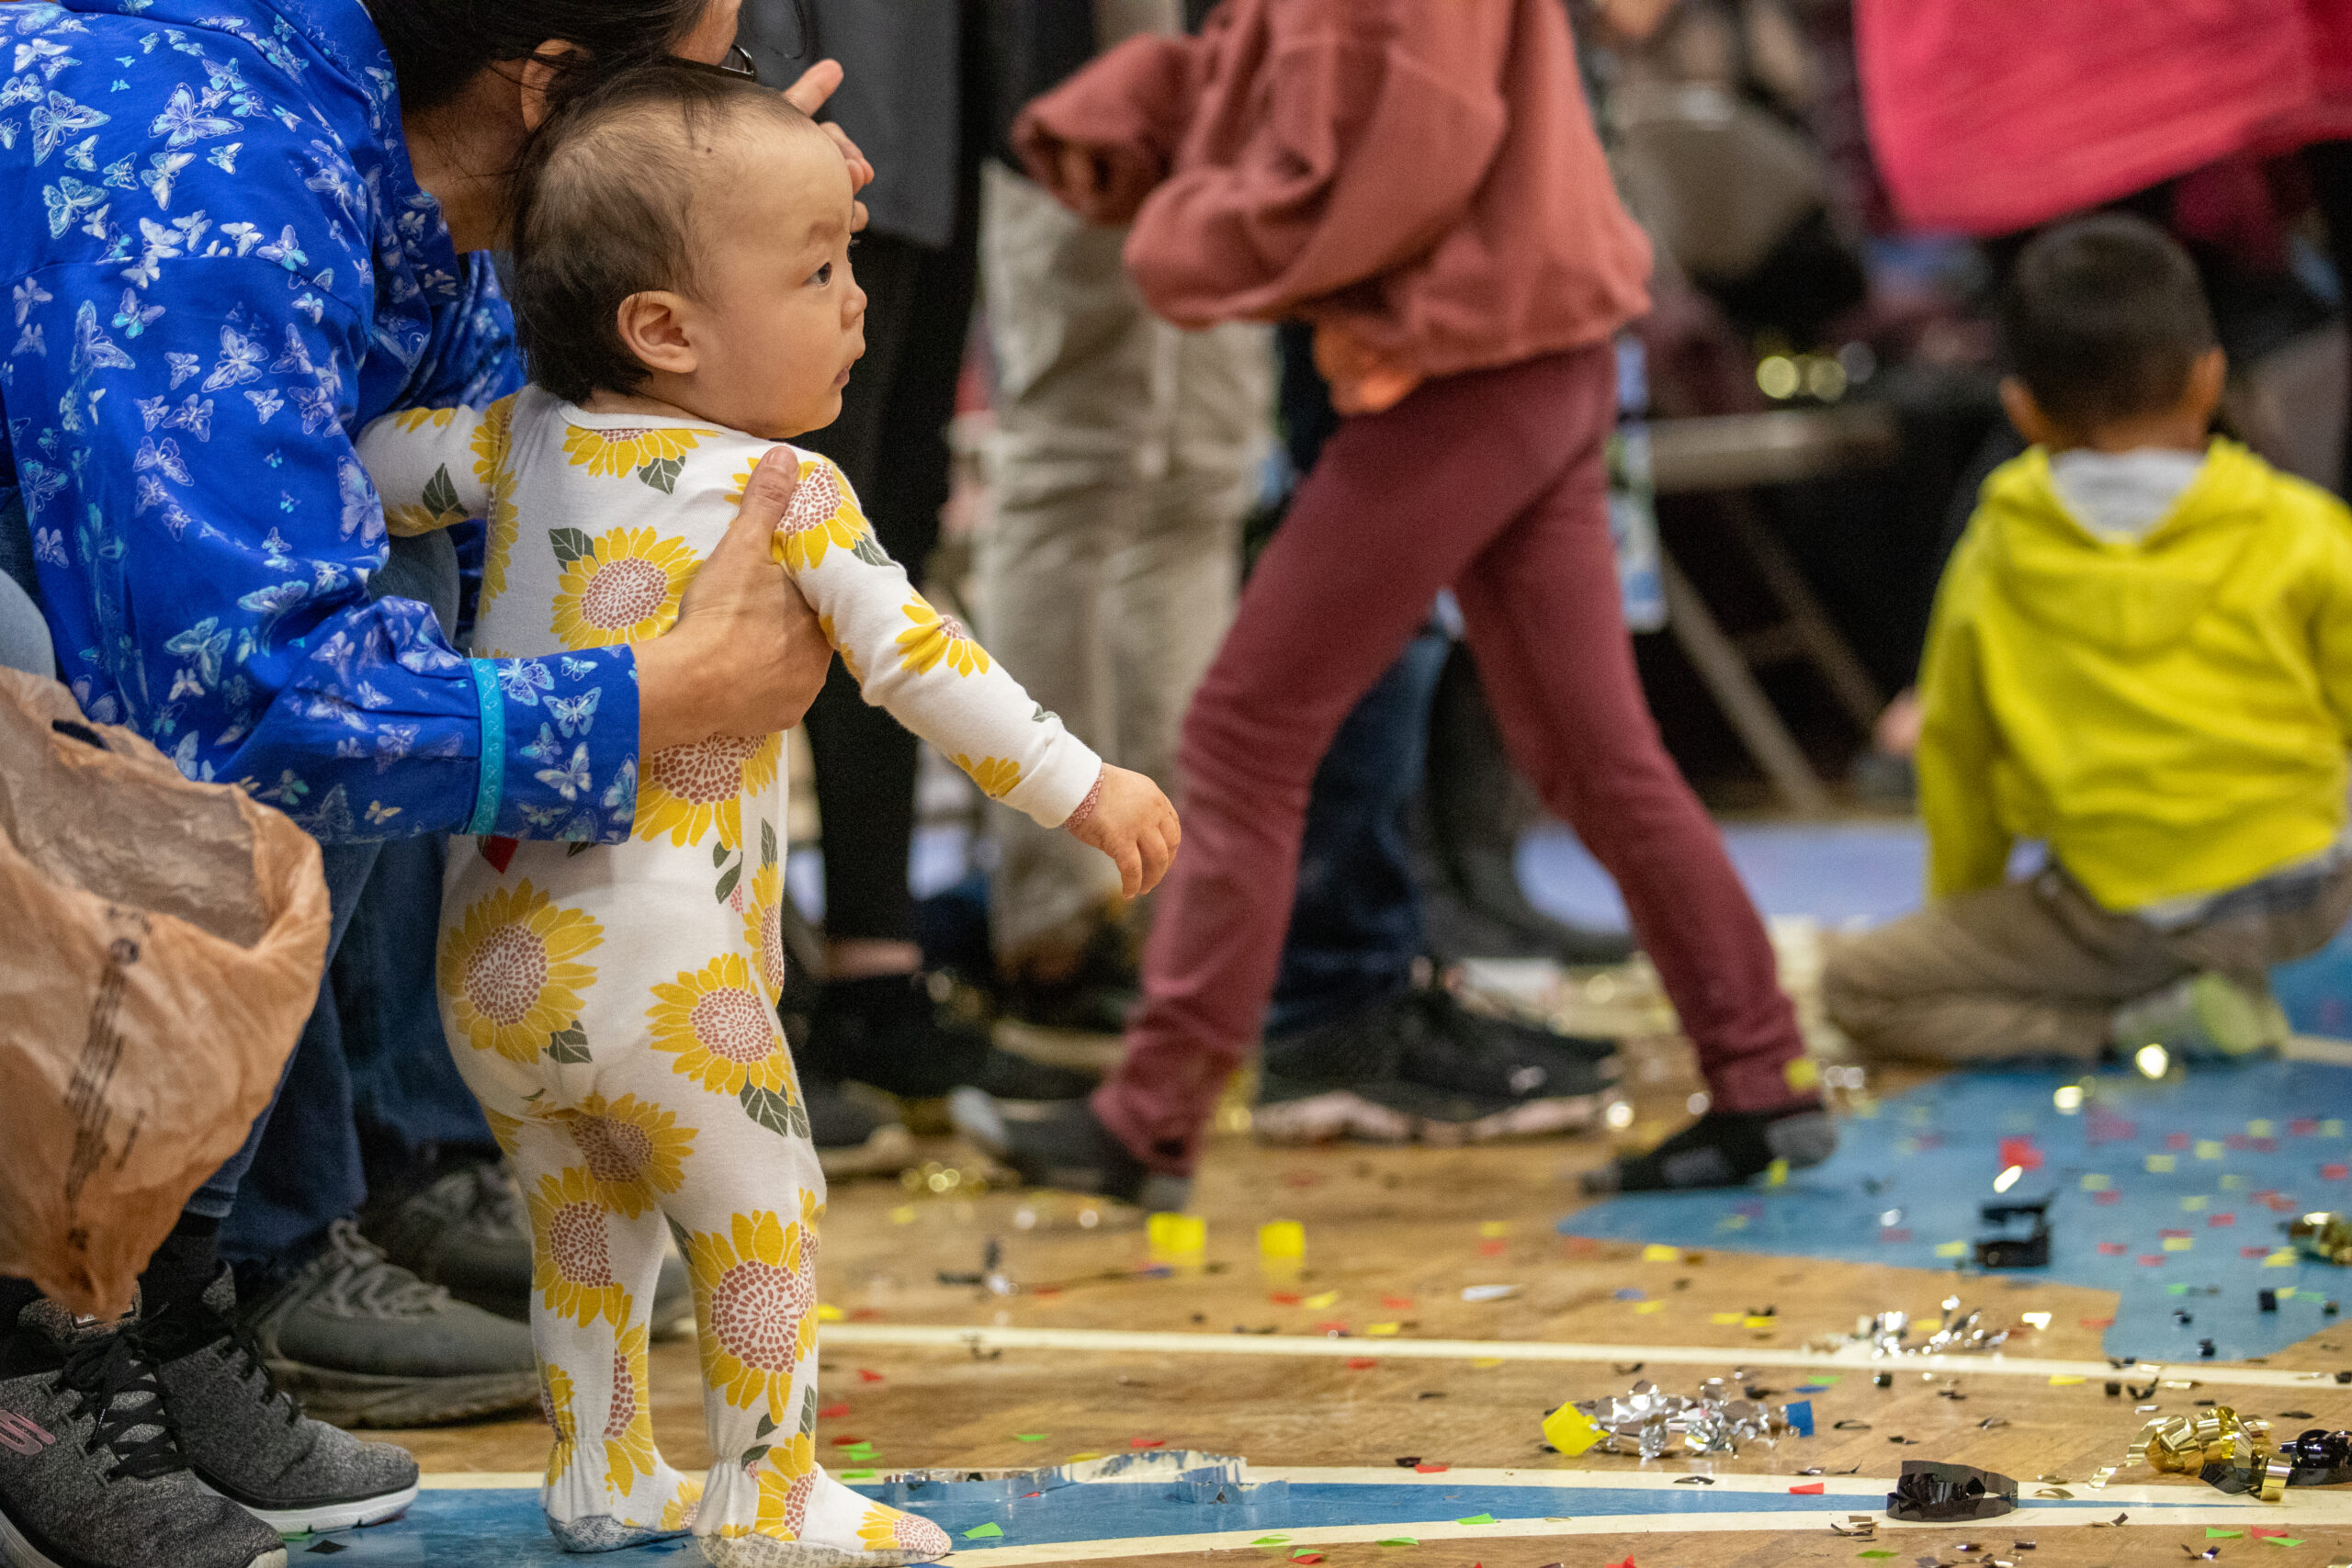 A baby stands on a gym floor surrounded by confetti.